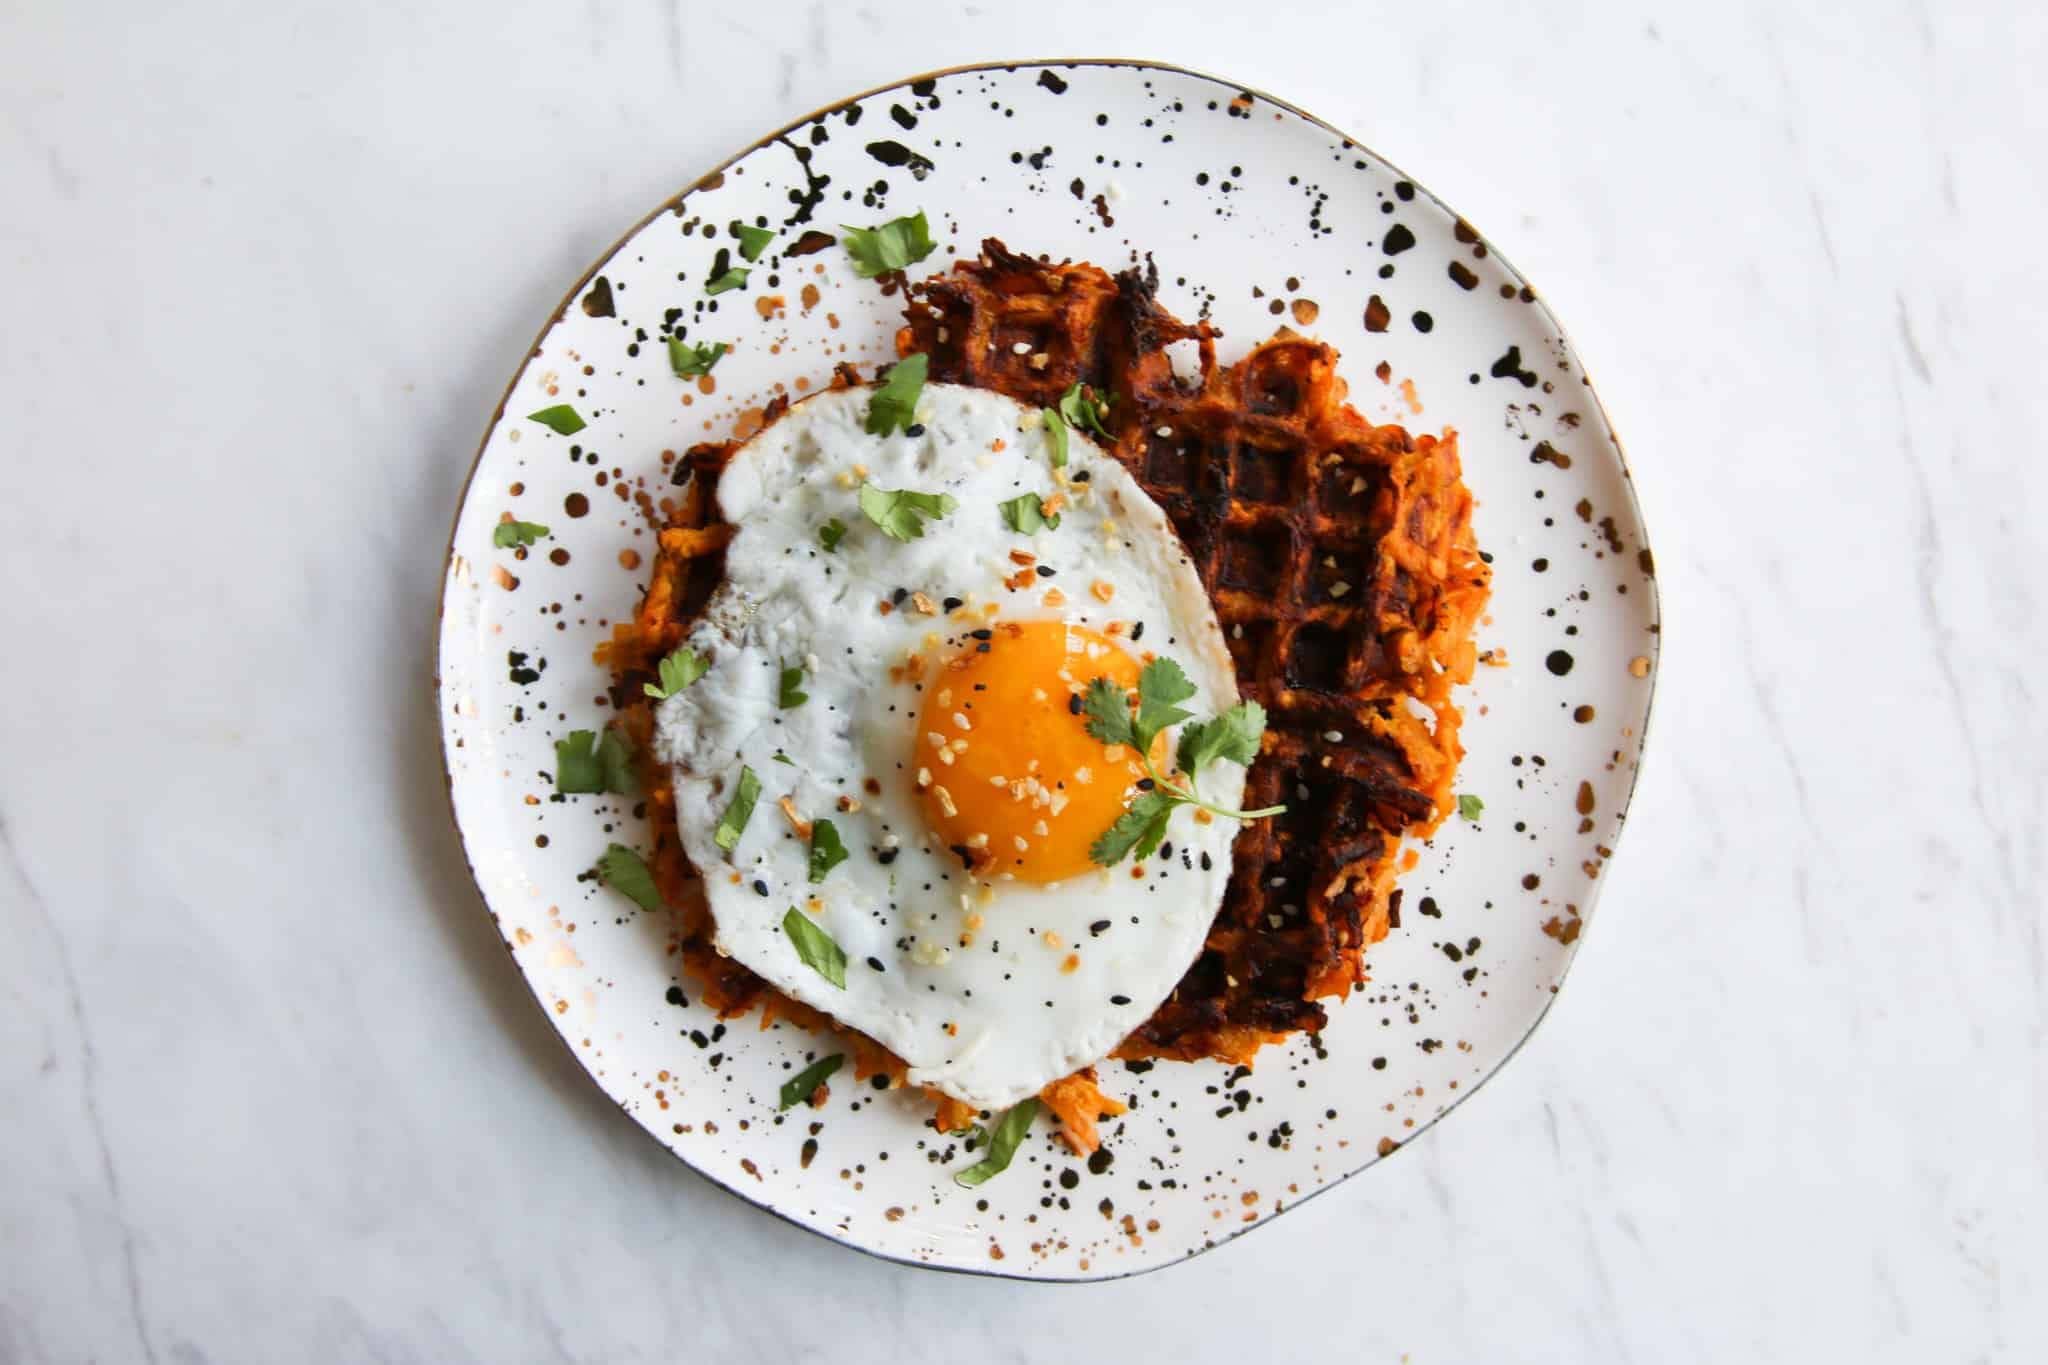 sweet potato waffle hashed browns with egg on top